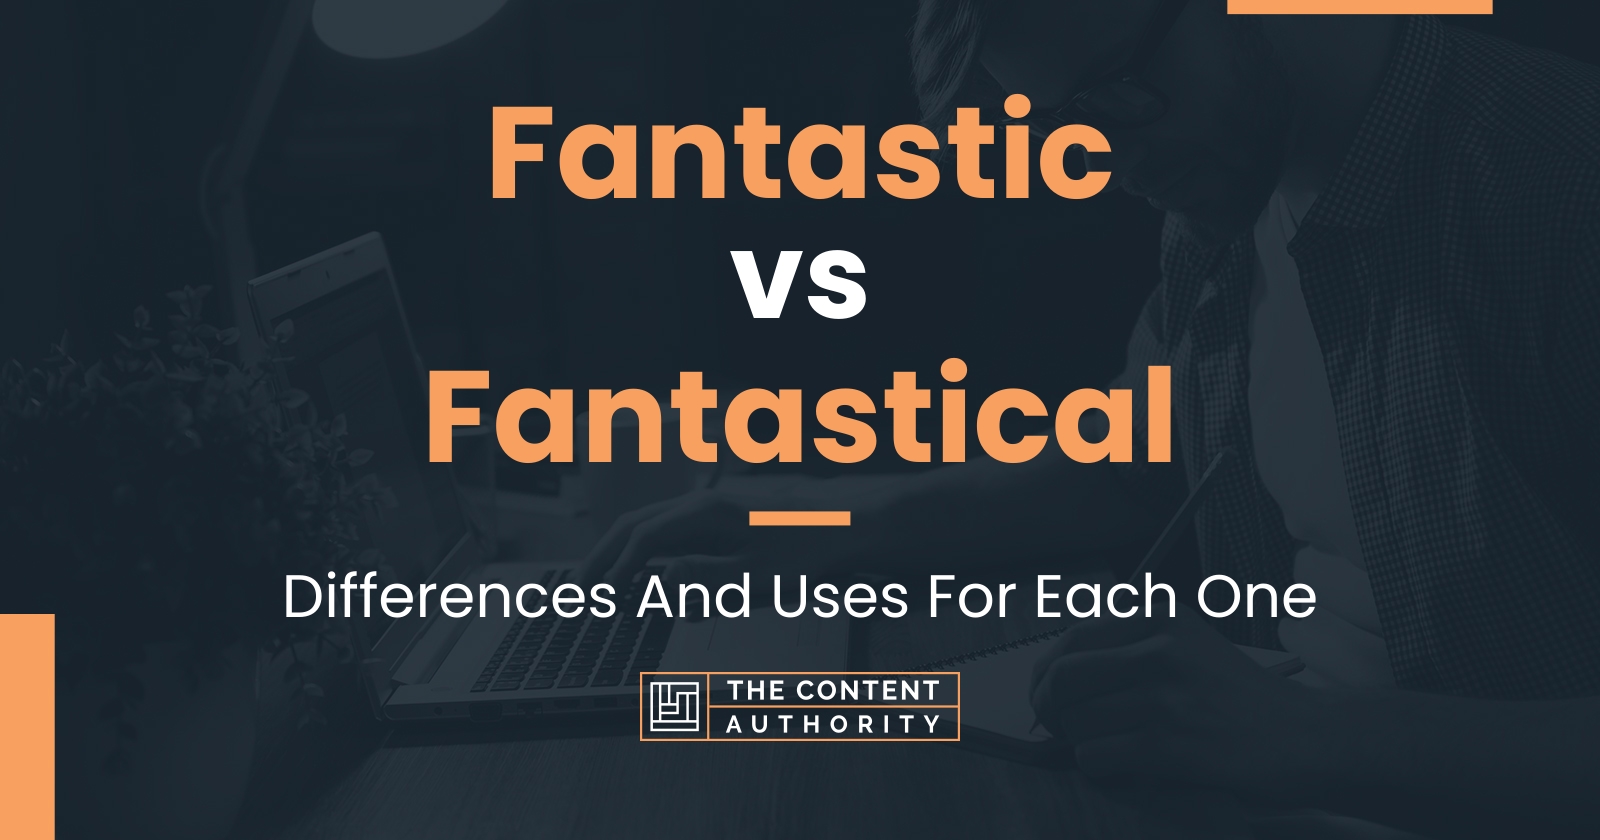 Fantastic vs Fantastical: Differences And Uses For Each One